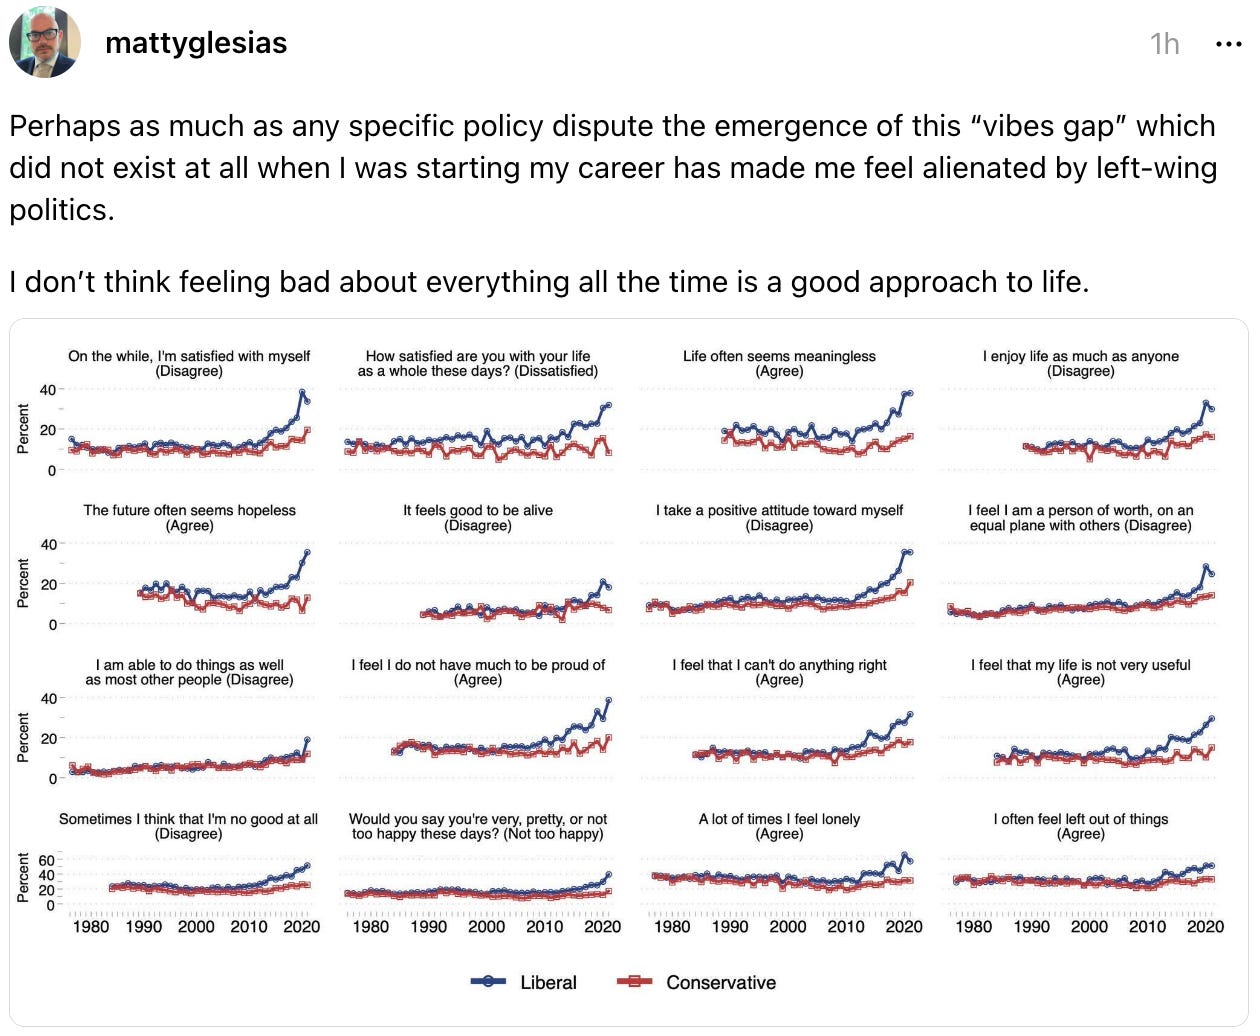  mattyglesias 1h Perhaps as much as any specific policy dispute the emergence of this “vibes gap” which did not exist at all when I was starting my career has made me feel alienated by left-wing politics.  I don’t think feeling bad about everything all the time is a good approach to life.